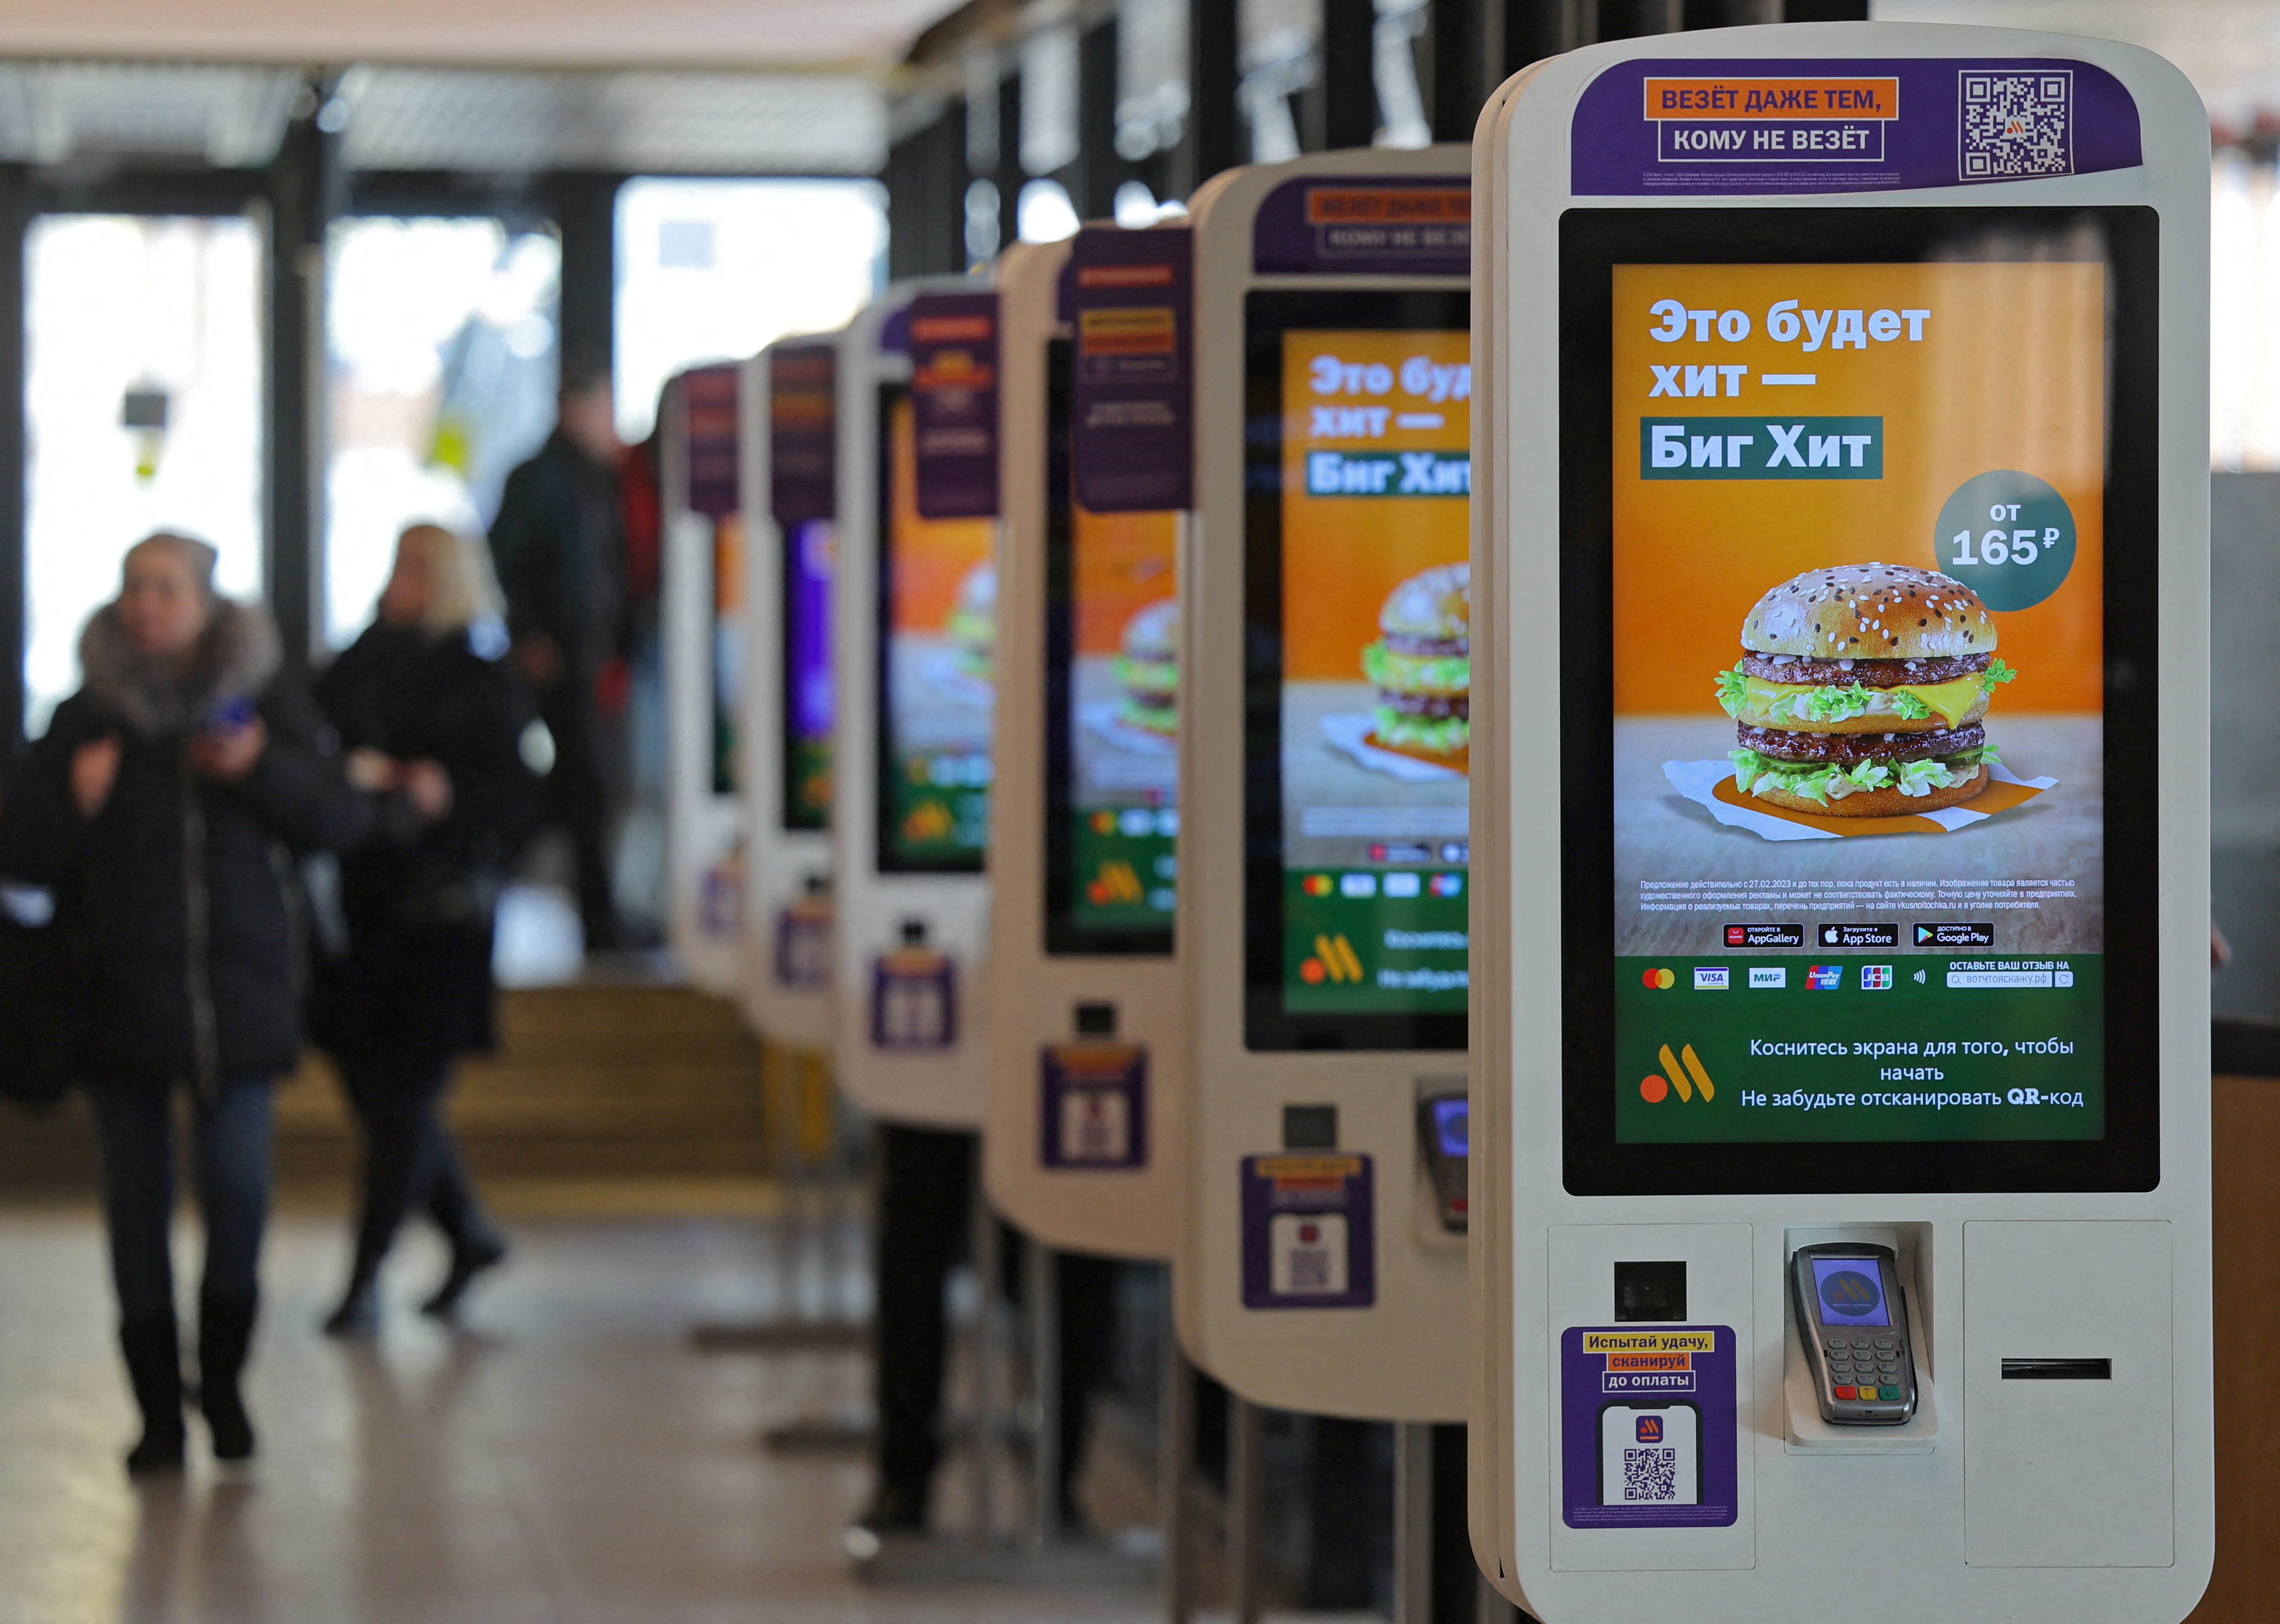 A view shows self-service kiosks advertising a Big Hit burger at Vkusno & tochka fast food restaurant in Moscow